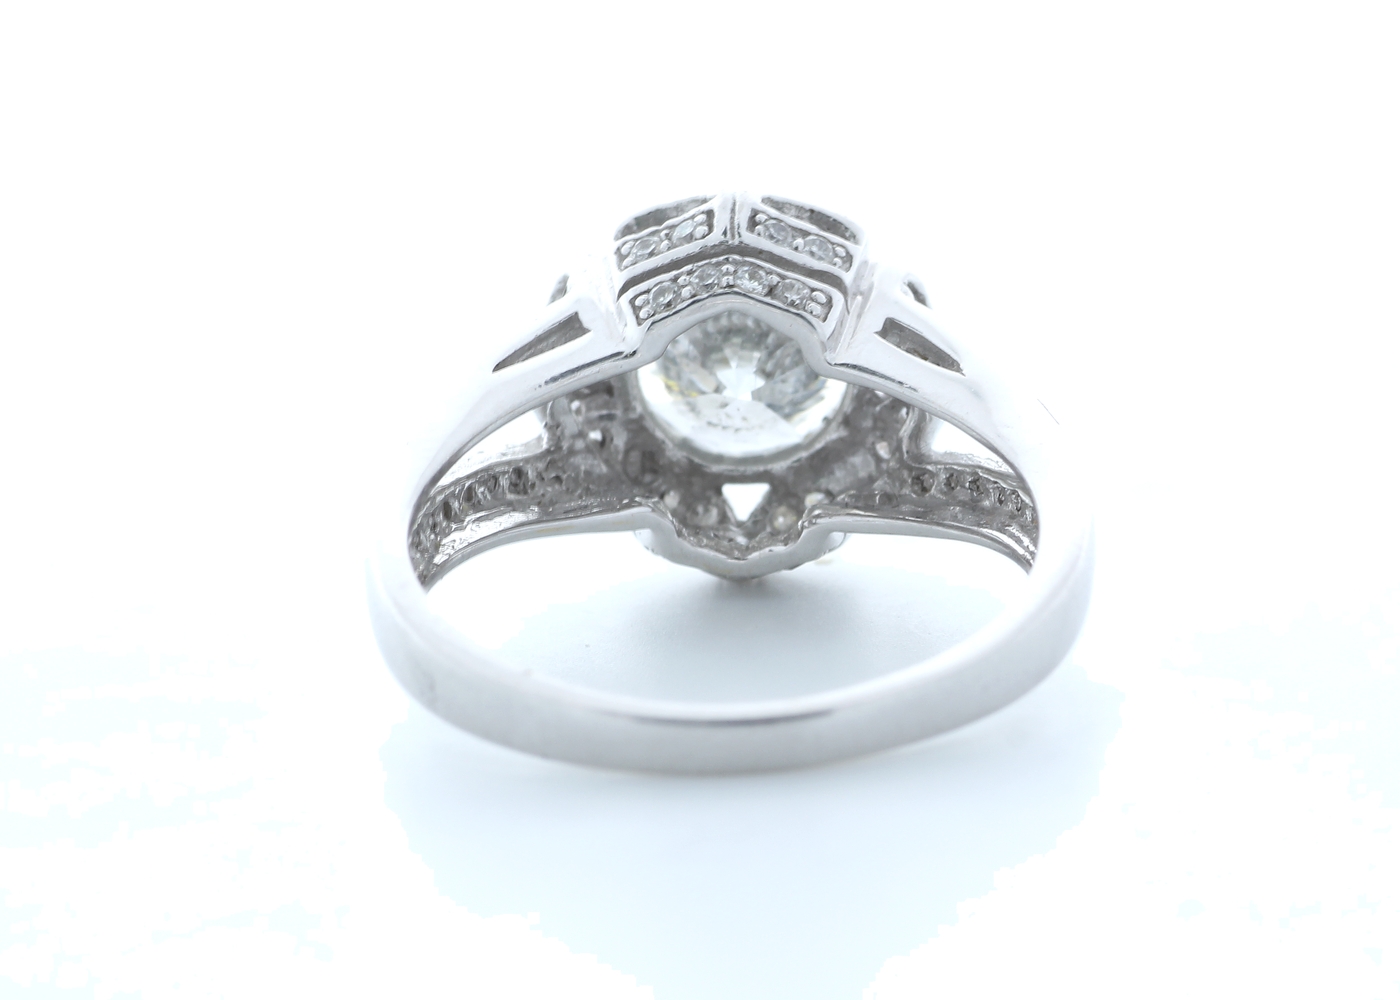 18ct White Gold Single Stone With Halo Setting Ring 2.06 (1.66) Carats - Image 3 of 5